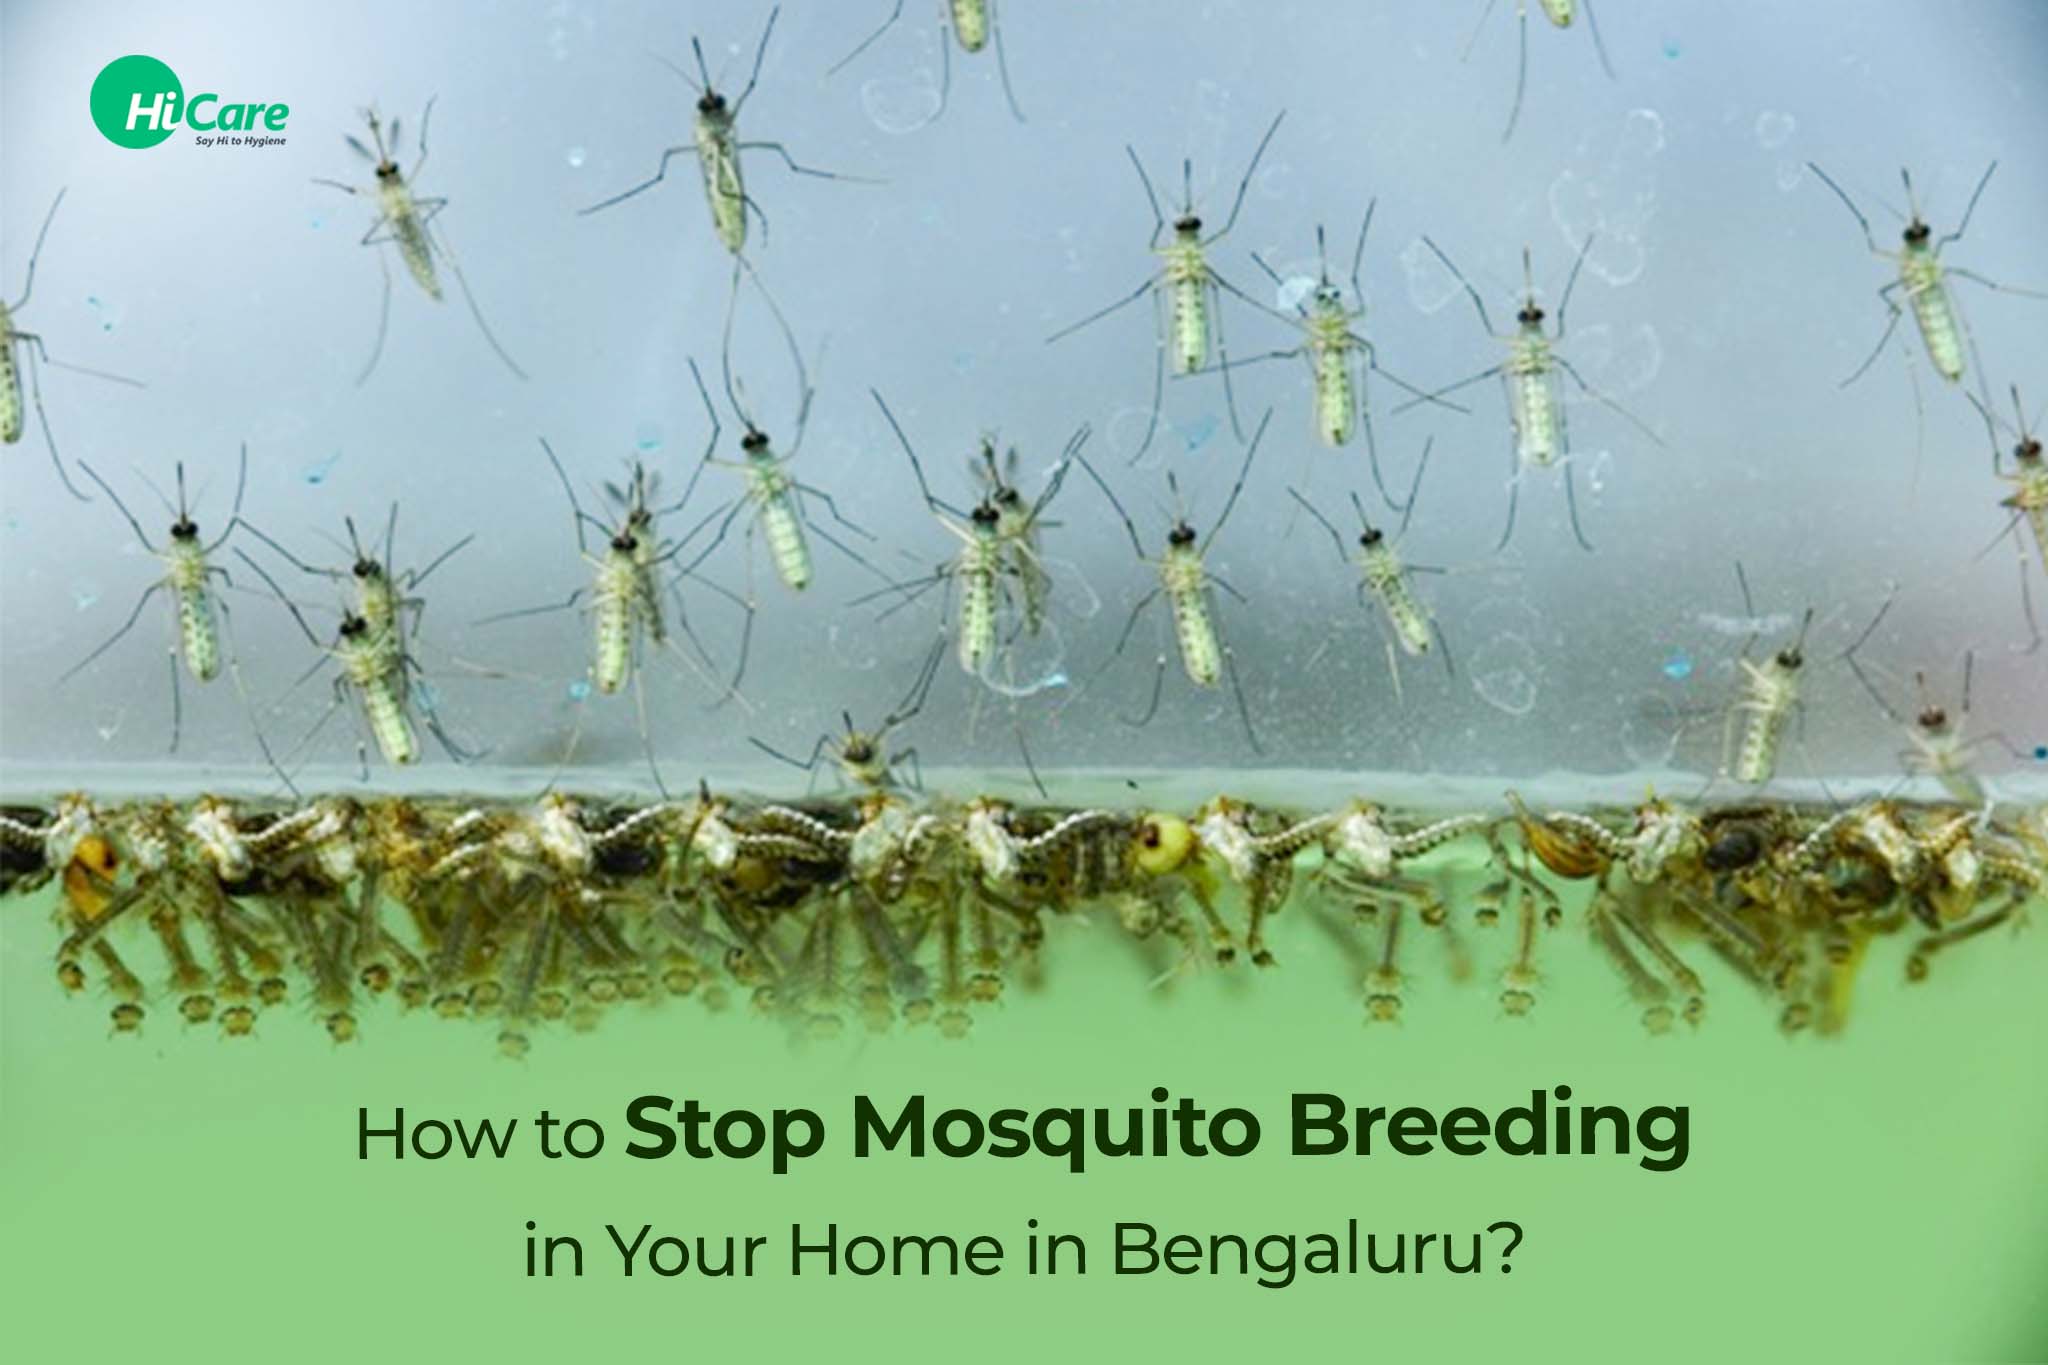 How to Stop Mosquito Breeding in Your Home in Bengaluru?